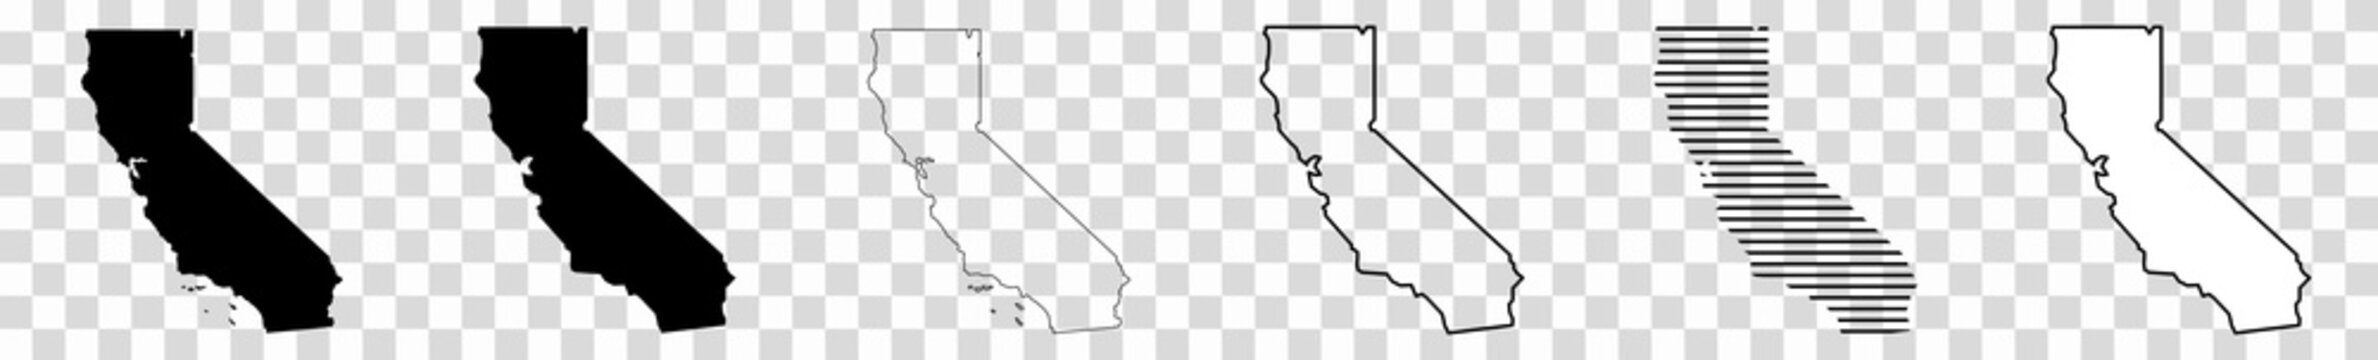 california map black | state border | united states | us america | transparent isolated | variations